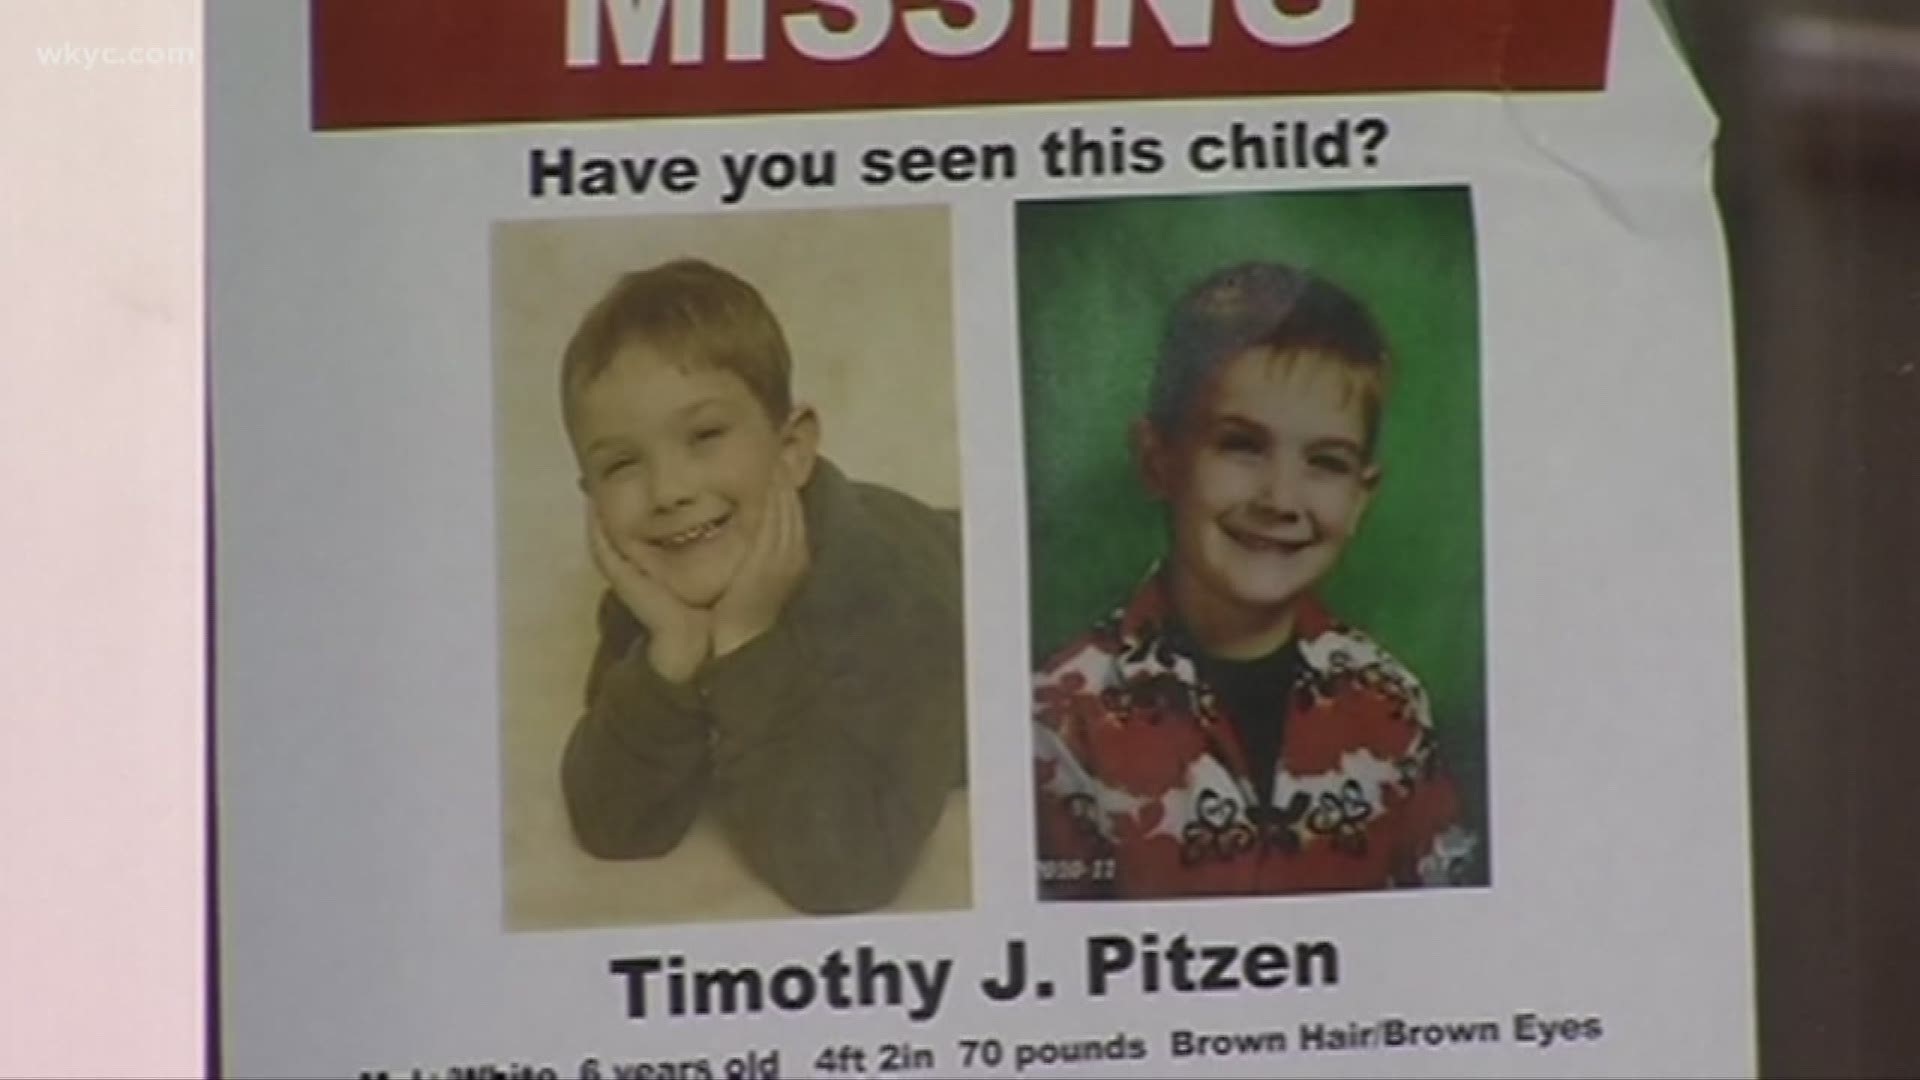 FBI confirms that man claiming to be missing boy is Medina native